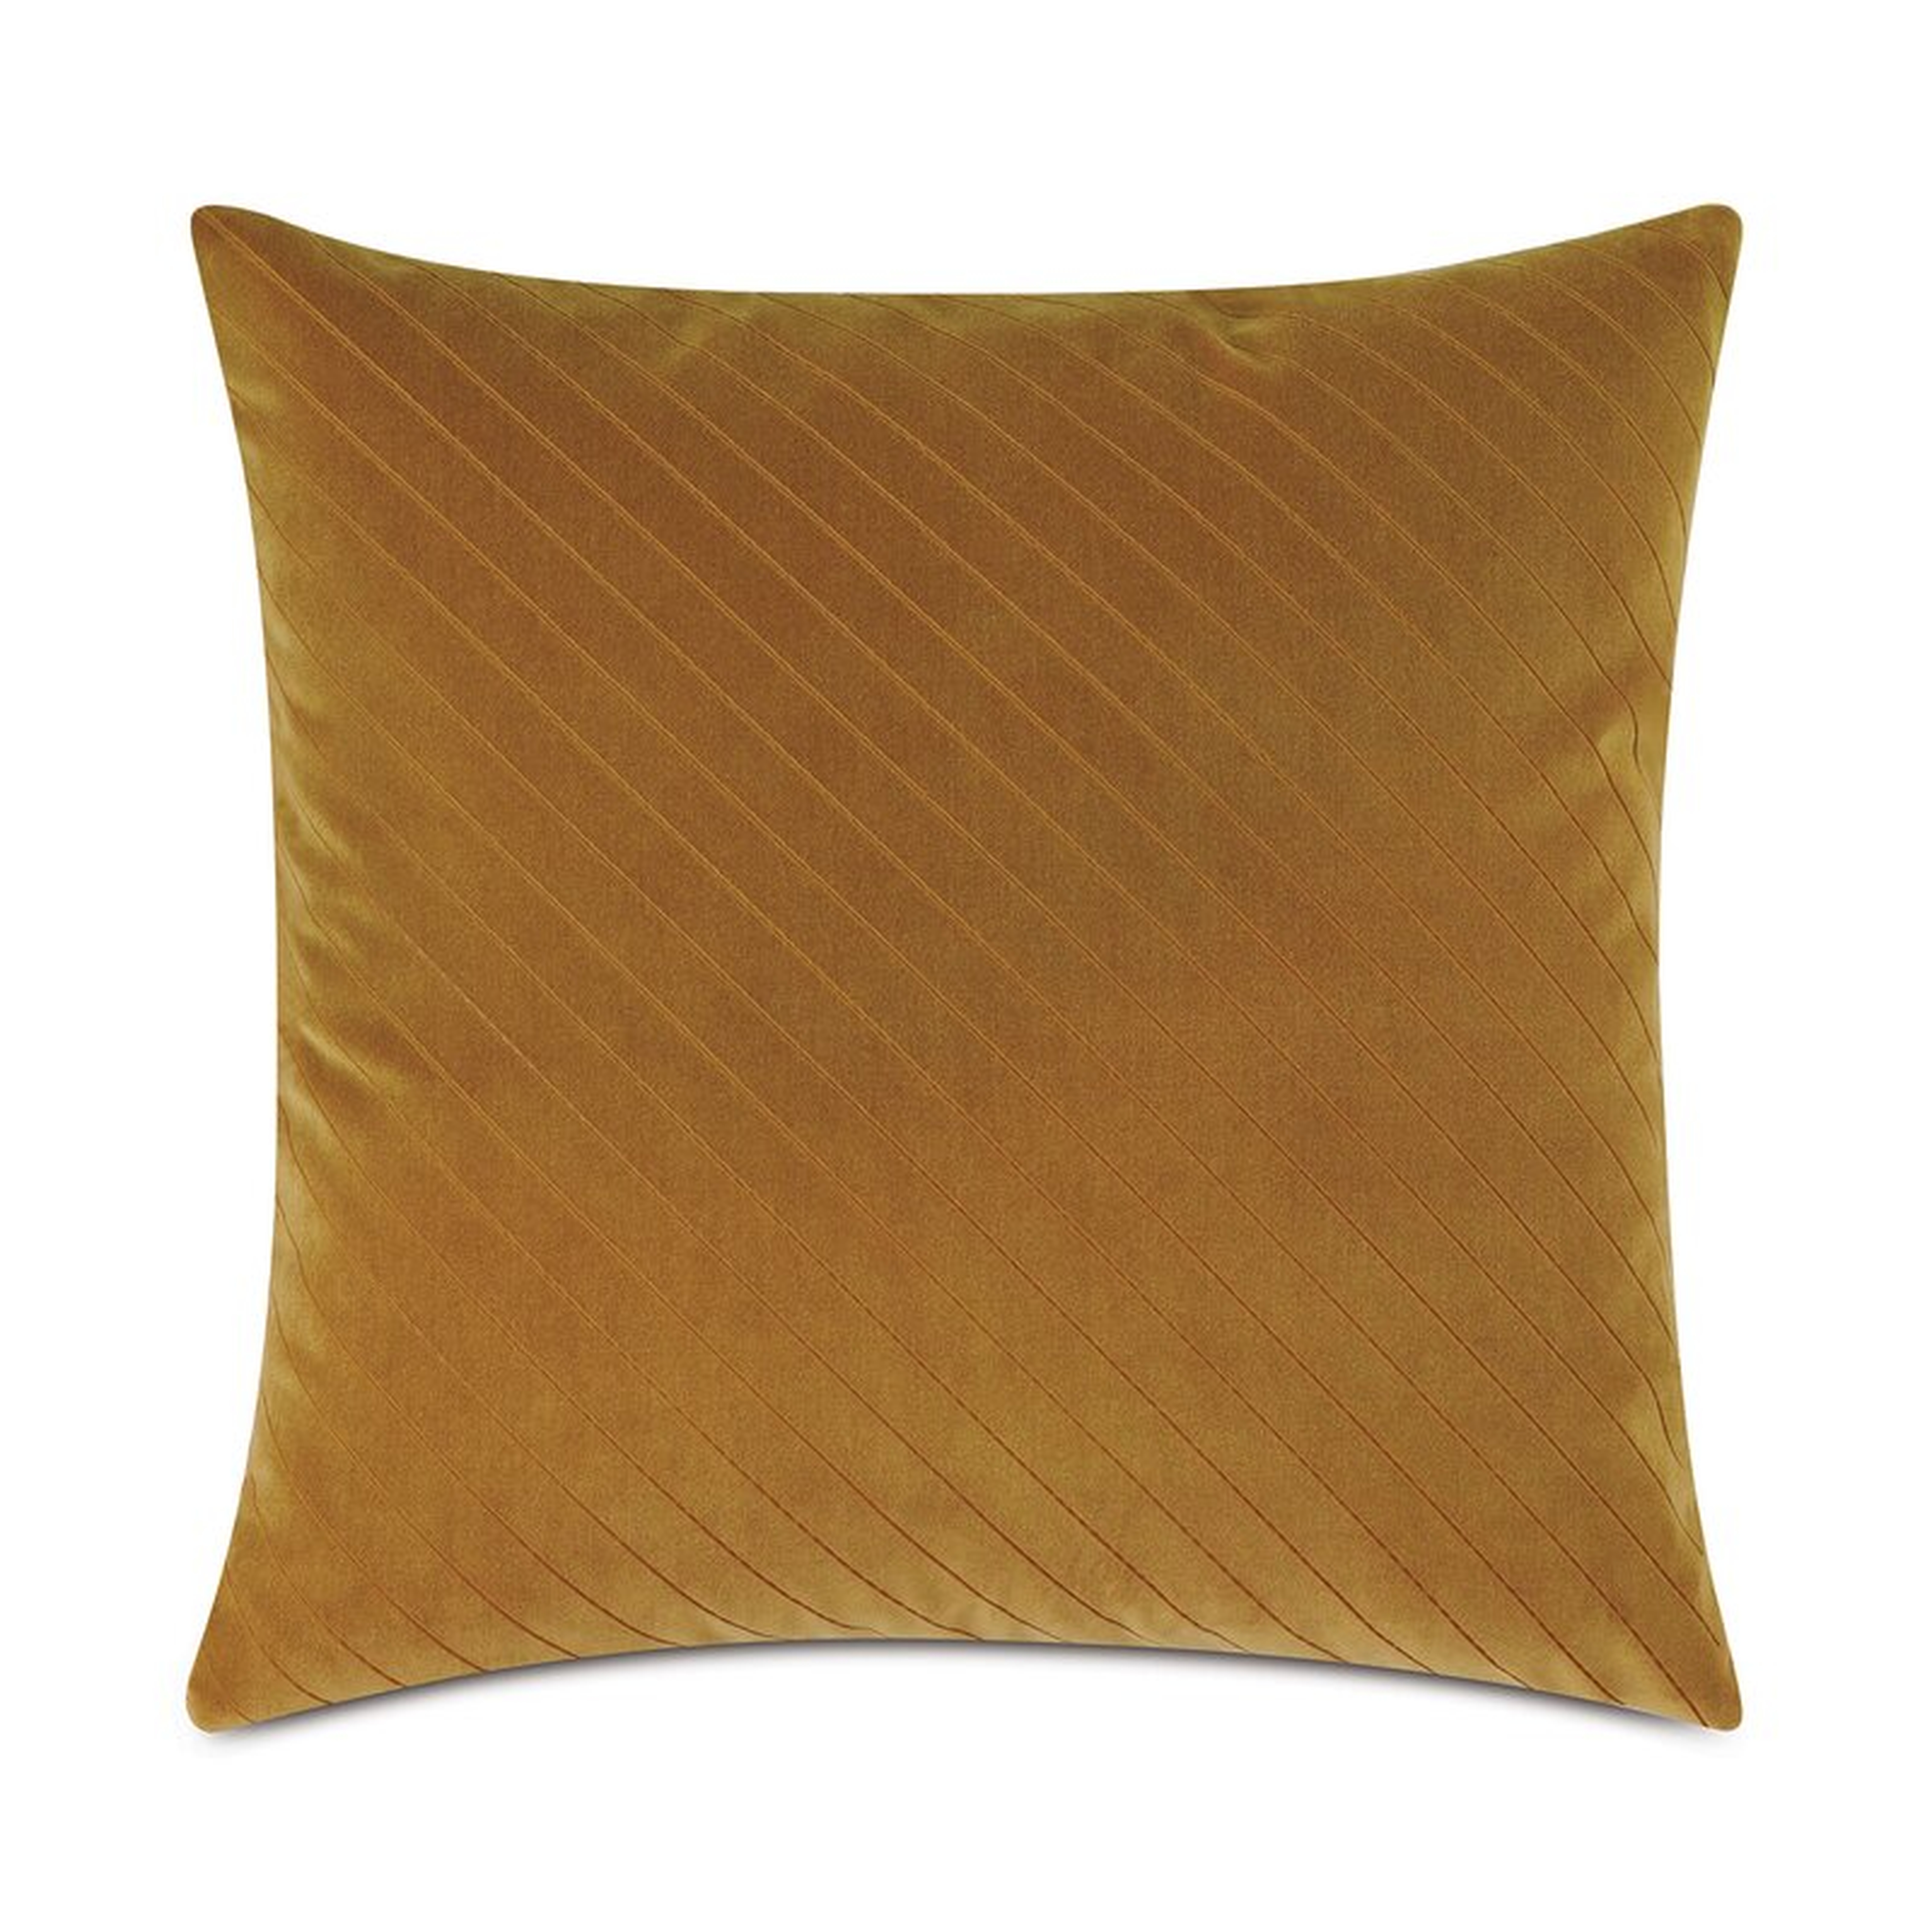 Eastern Accents Mackay Embossed Square Pillow Cover & Insert - Perigold